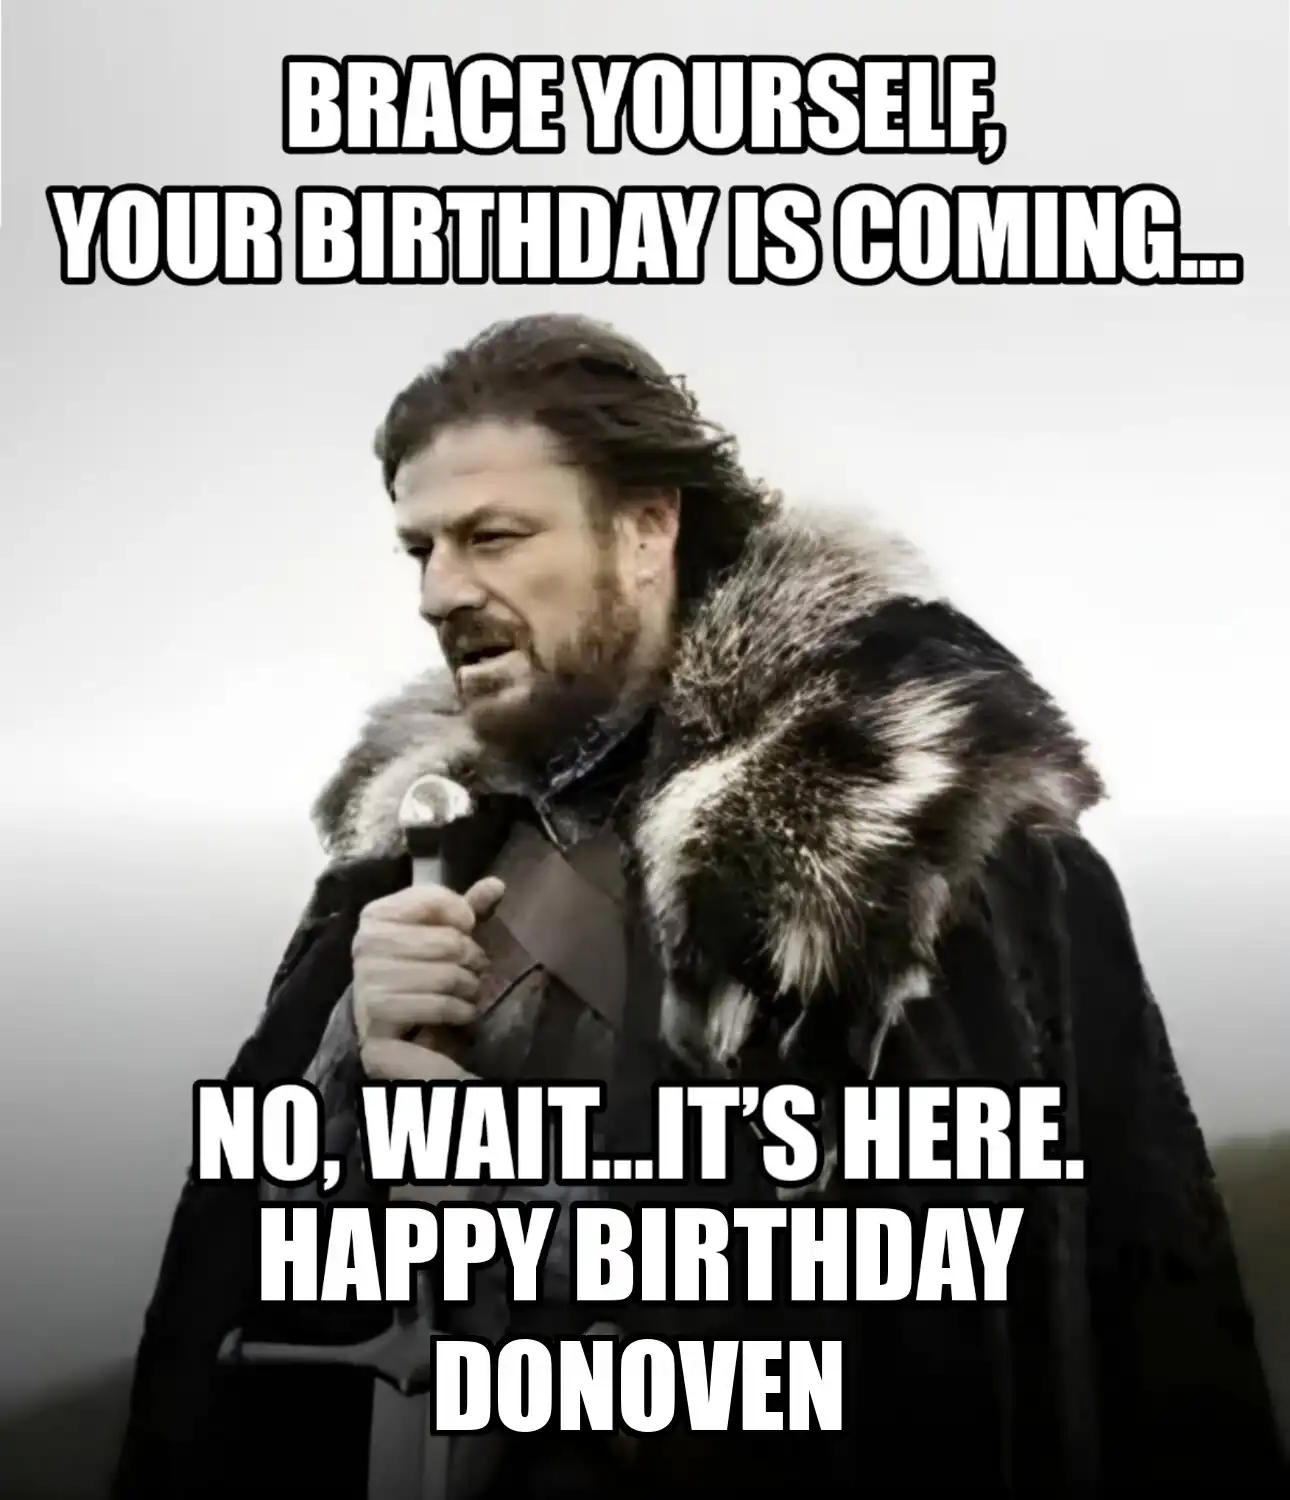 Happy Birthday Donoven Brace Yourself Your Birthday Is Coming Meme